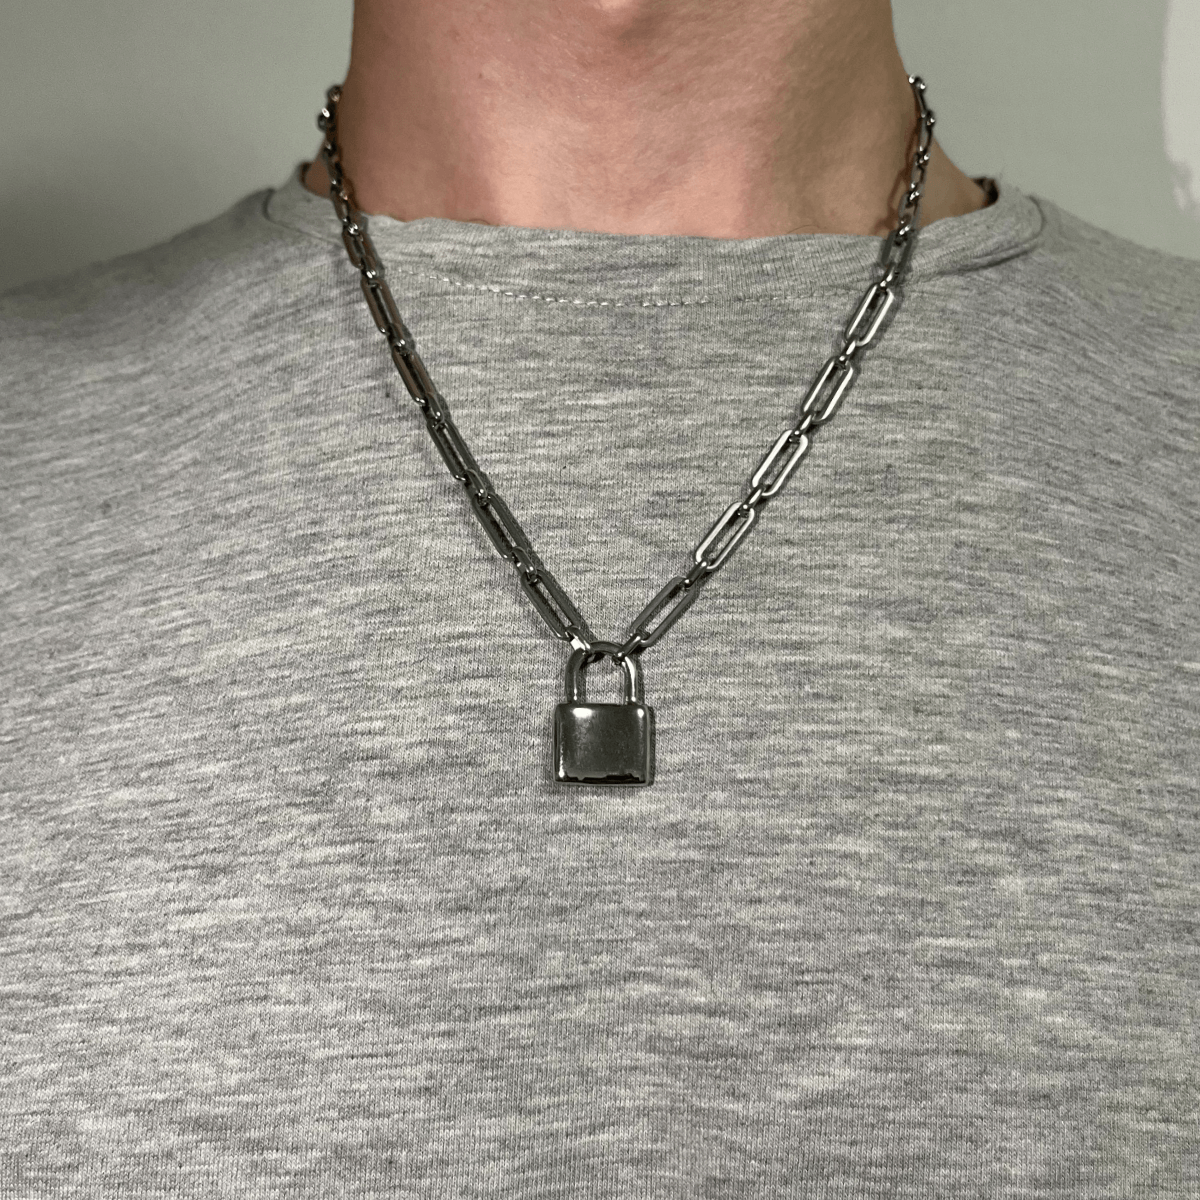 Givenchy Men's 4G Crystal Lock Pendant Necklace | Neiman Marcus